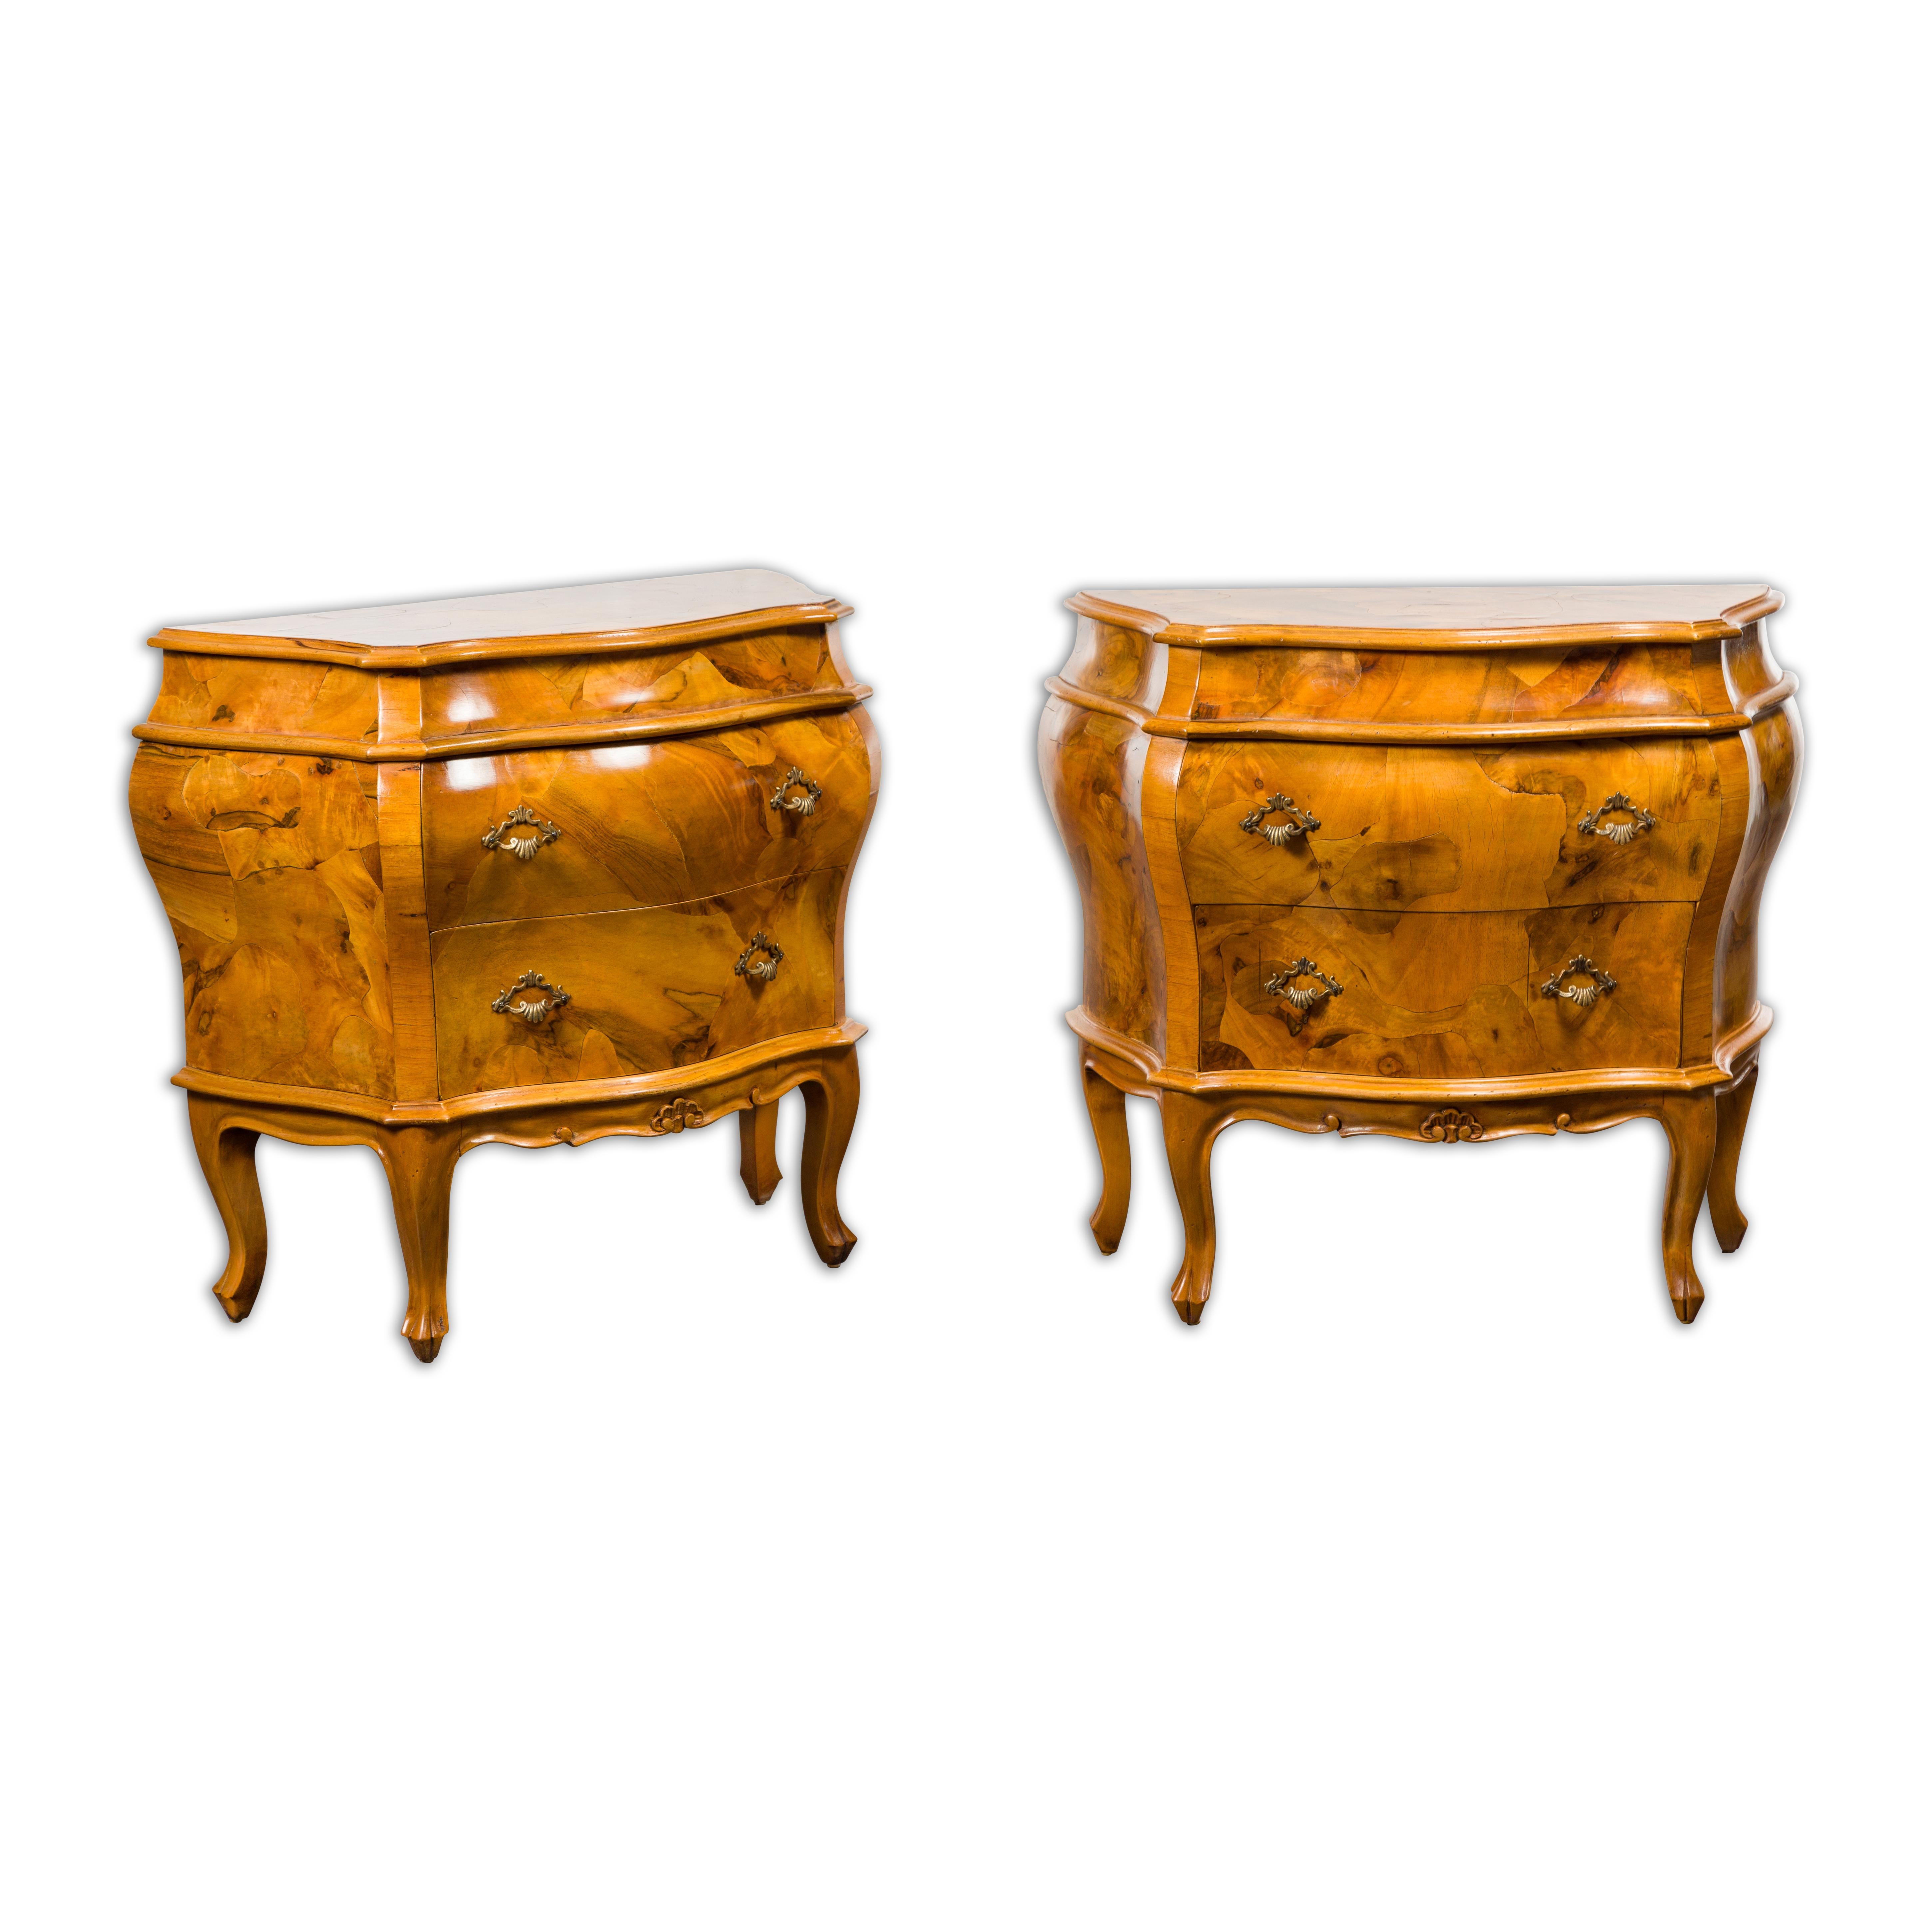 A pair of Midcentury Rococo style walnut bombé bedside chests with two drawers and cabriole legs. Immerse yourself in the elegance of bygone eras with this pair of mid-century Rococo-style bedside chests, an exquisite homage to the lavish French